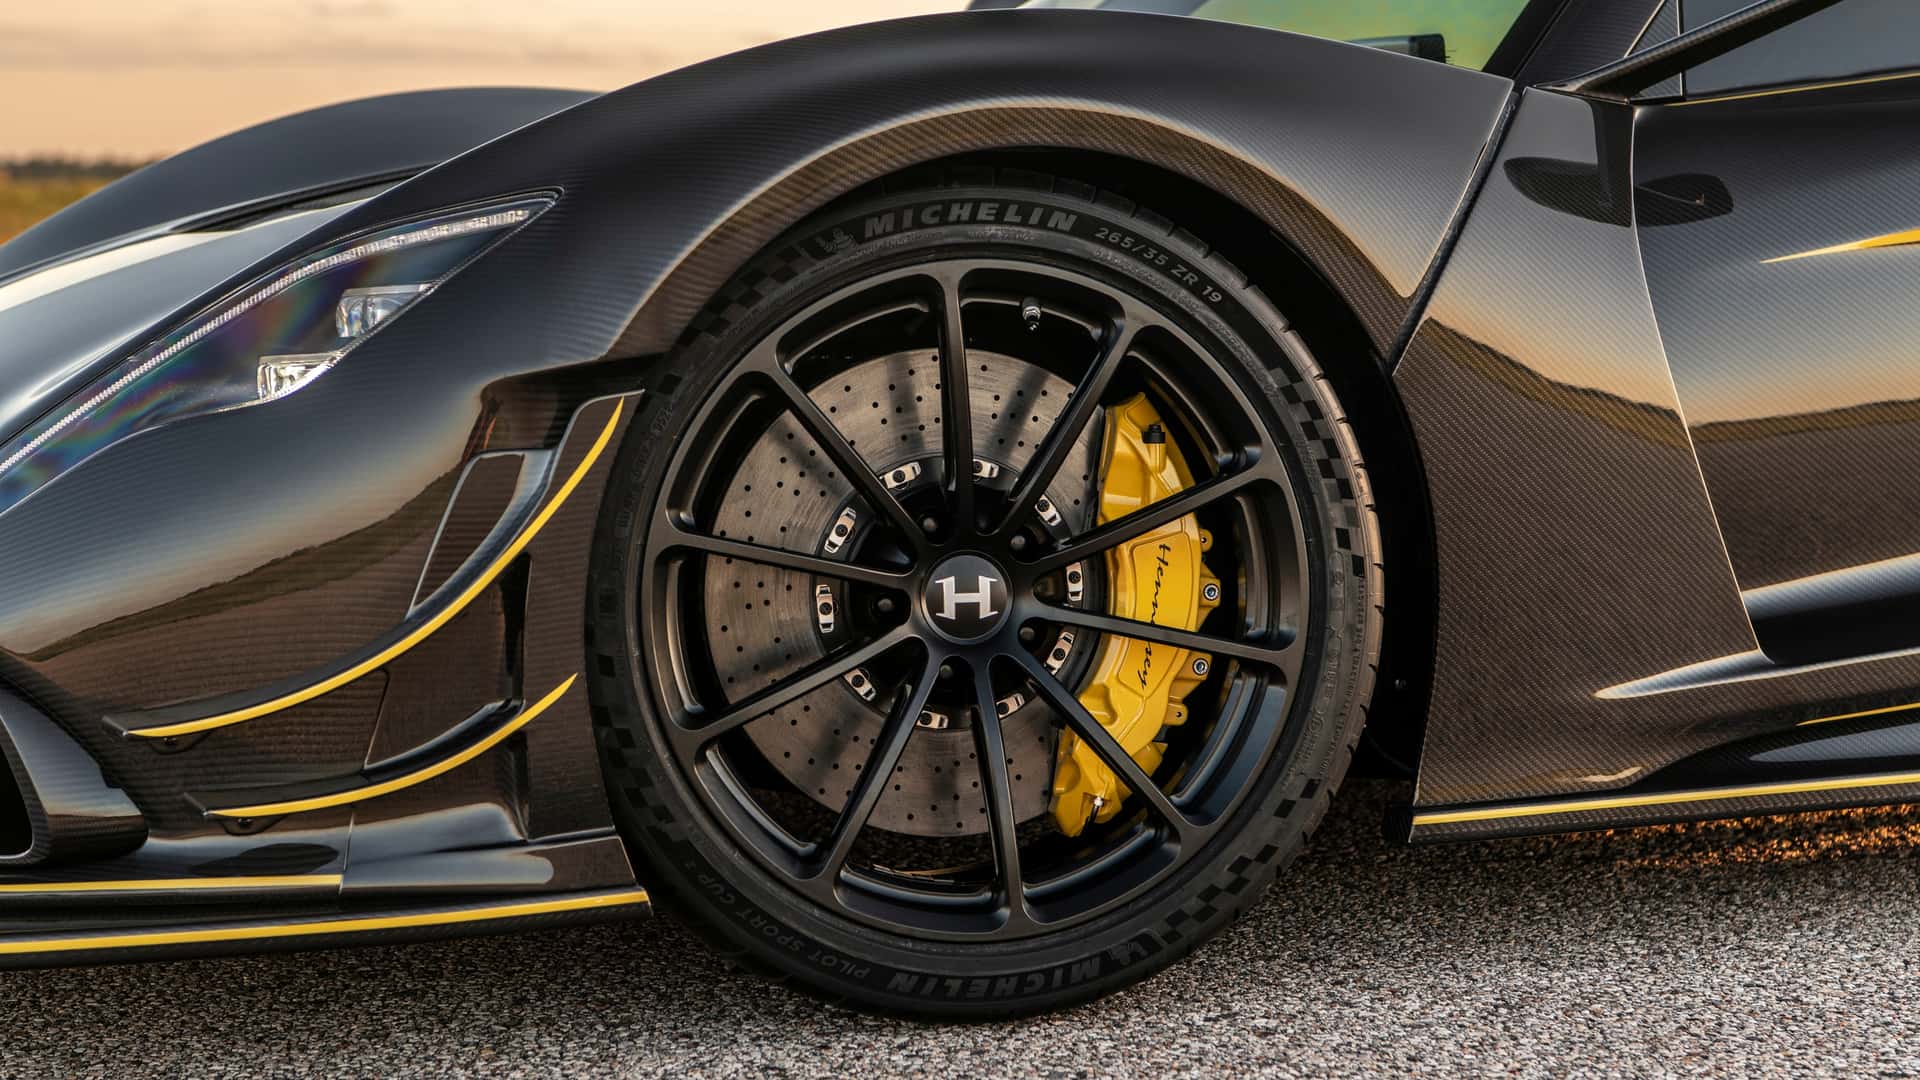 hennessey venom f5 revolution gets a 1,817hp roadster with 482km/h top speed